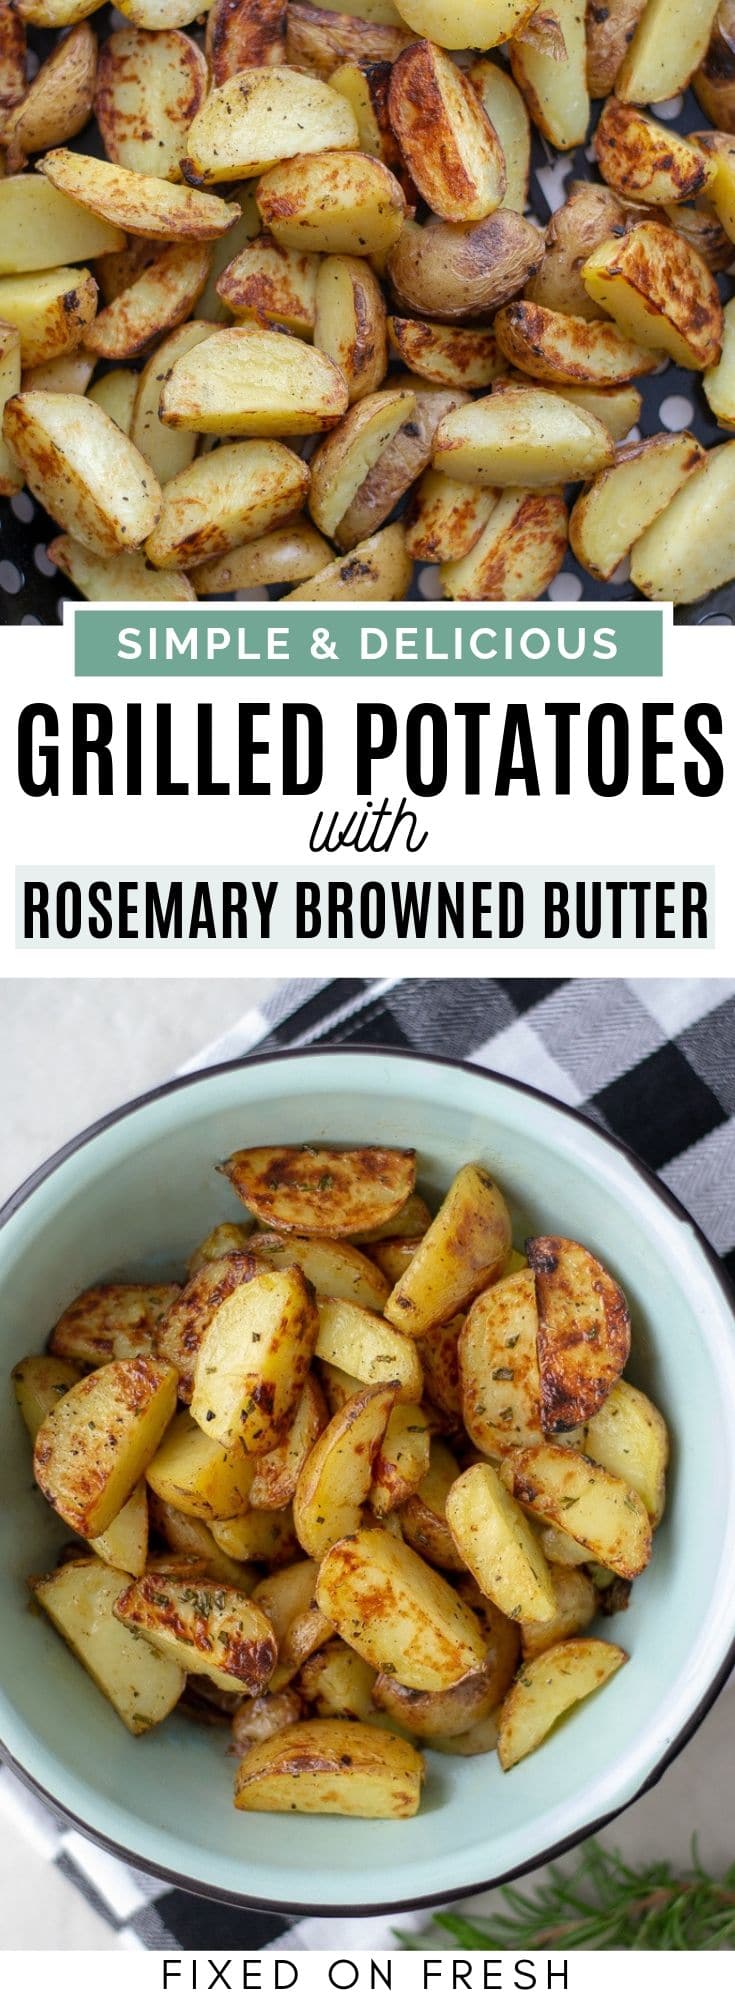 Crispy grilled Rosemary Browned Butter potatoes are super easy to make for your next bbq party in a grill basket. #grill #potatoes